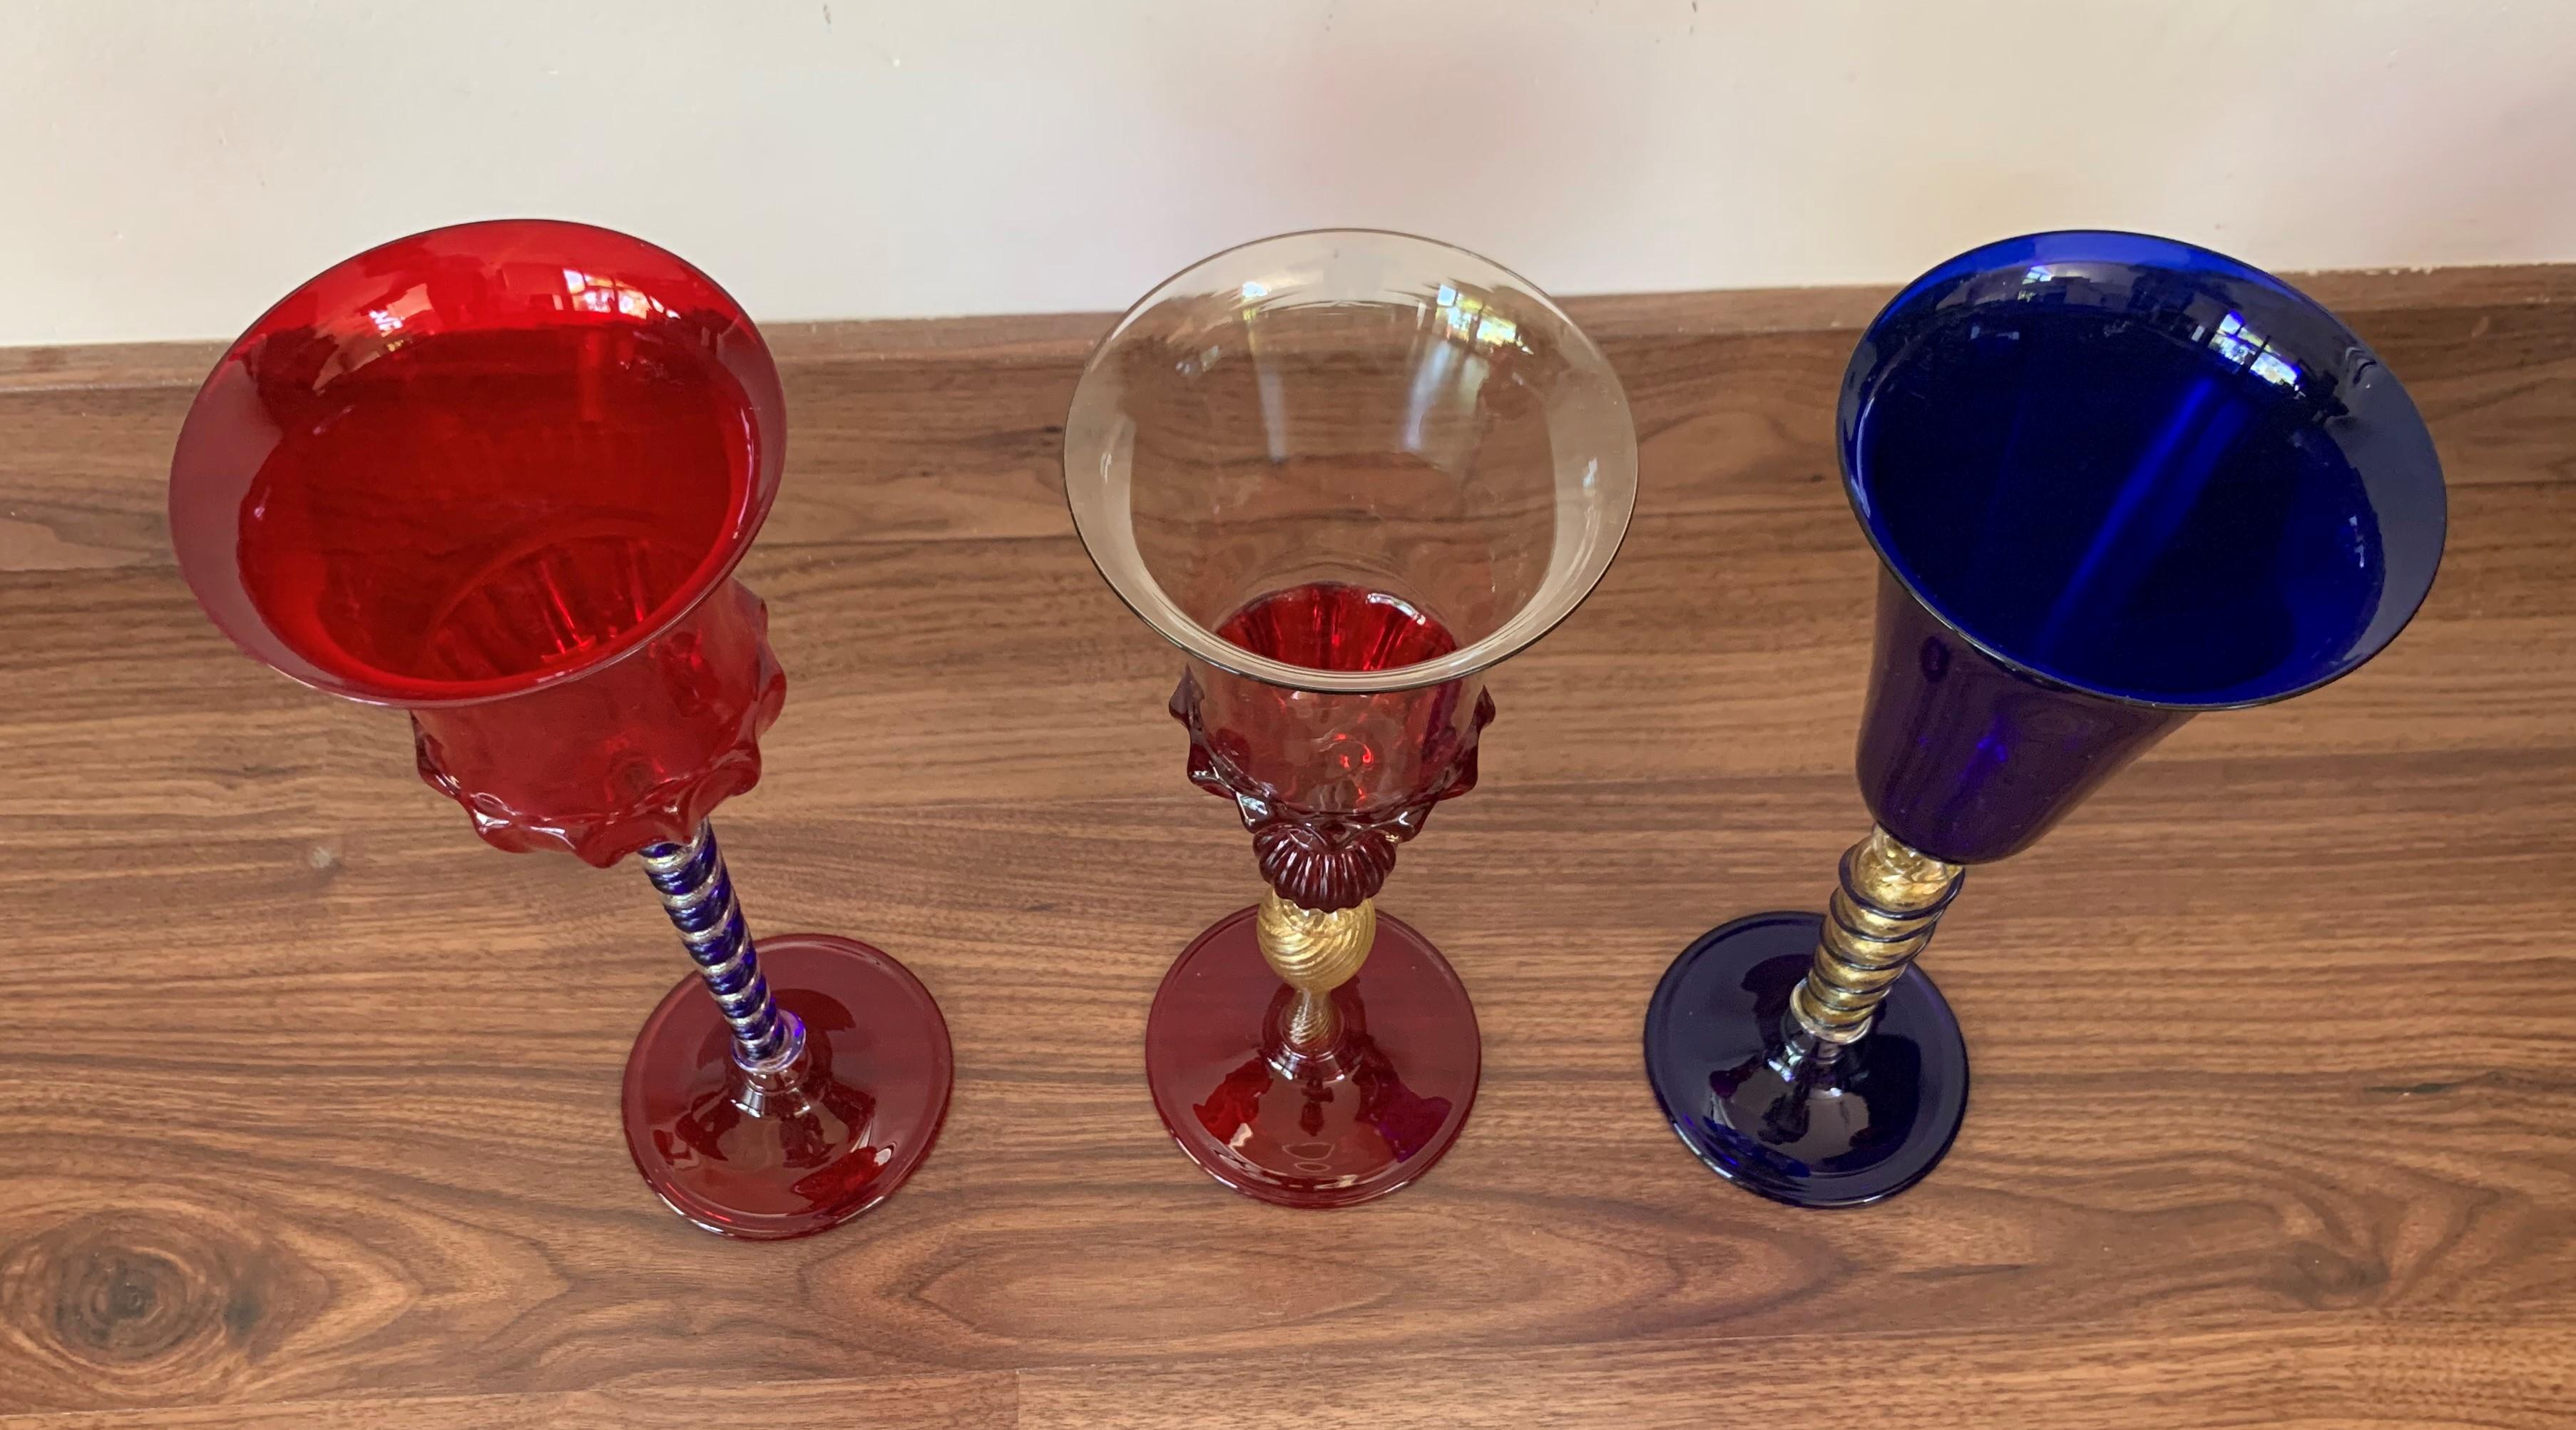 Set of three modern Murano glass goblets, completely handmade and mouth-blown.
This striking set is made of three complementary goblets, one in clear, other in red color and one in blue.
The gold stems feature a ridged pattern and are adorned by a